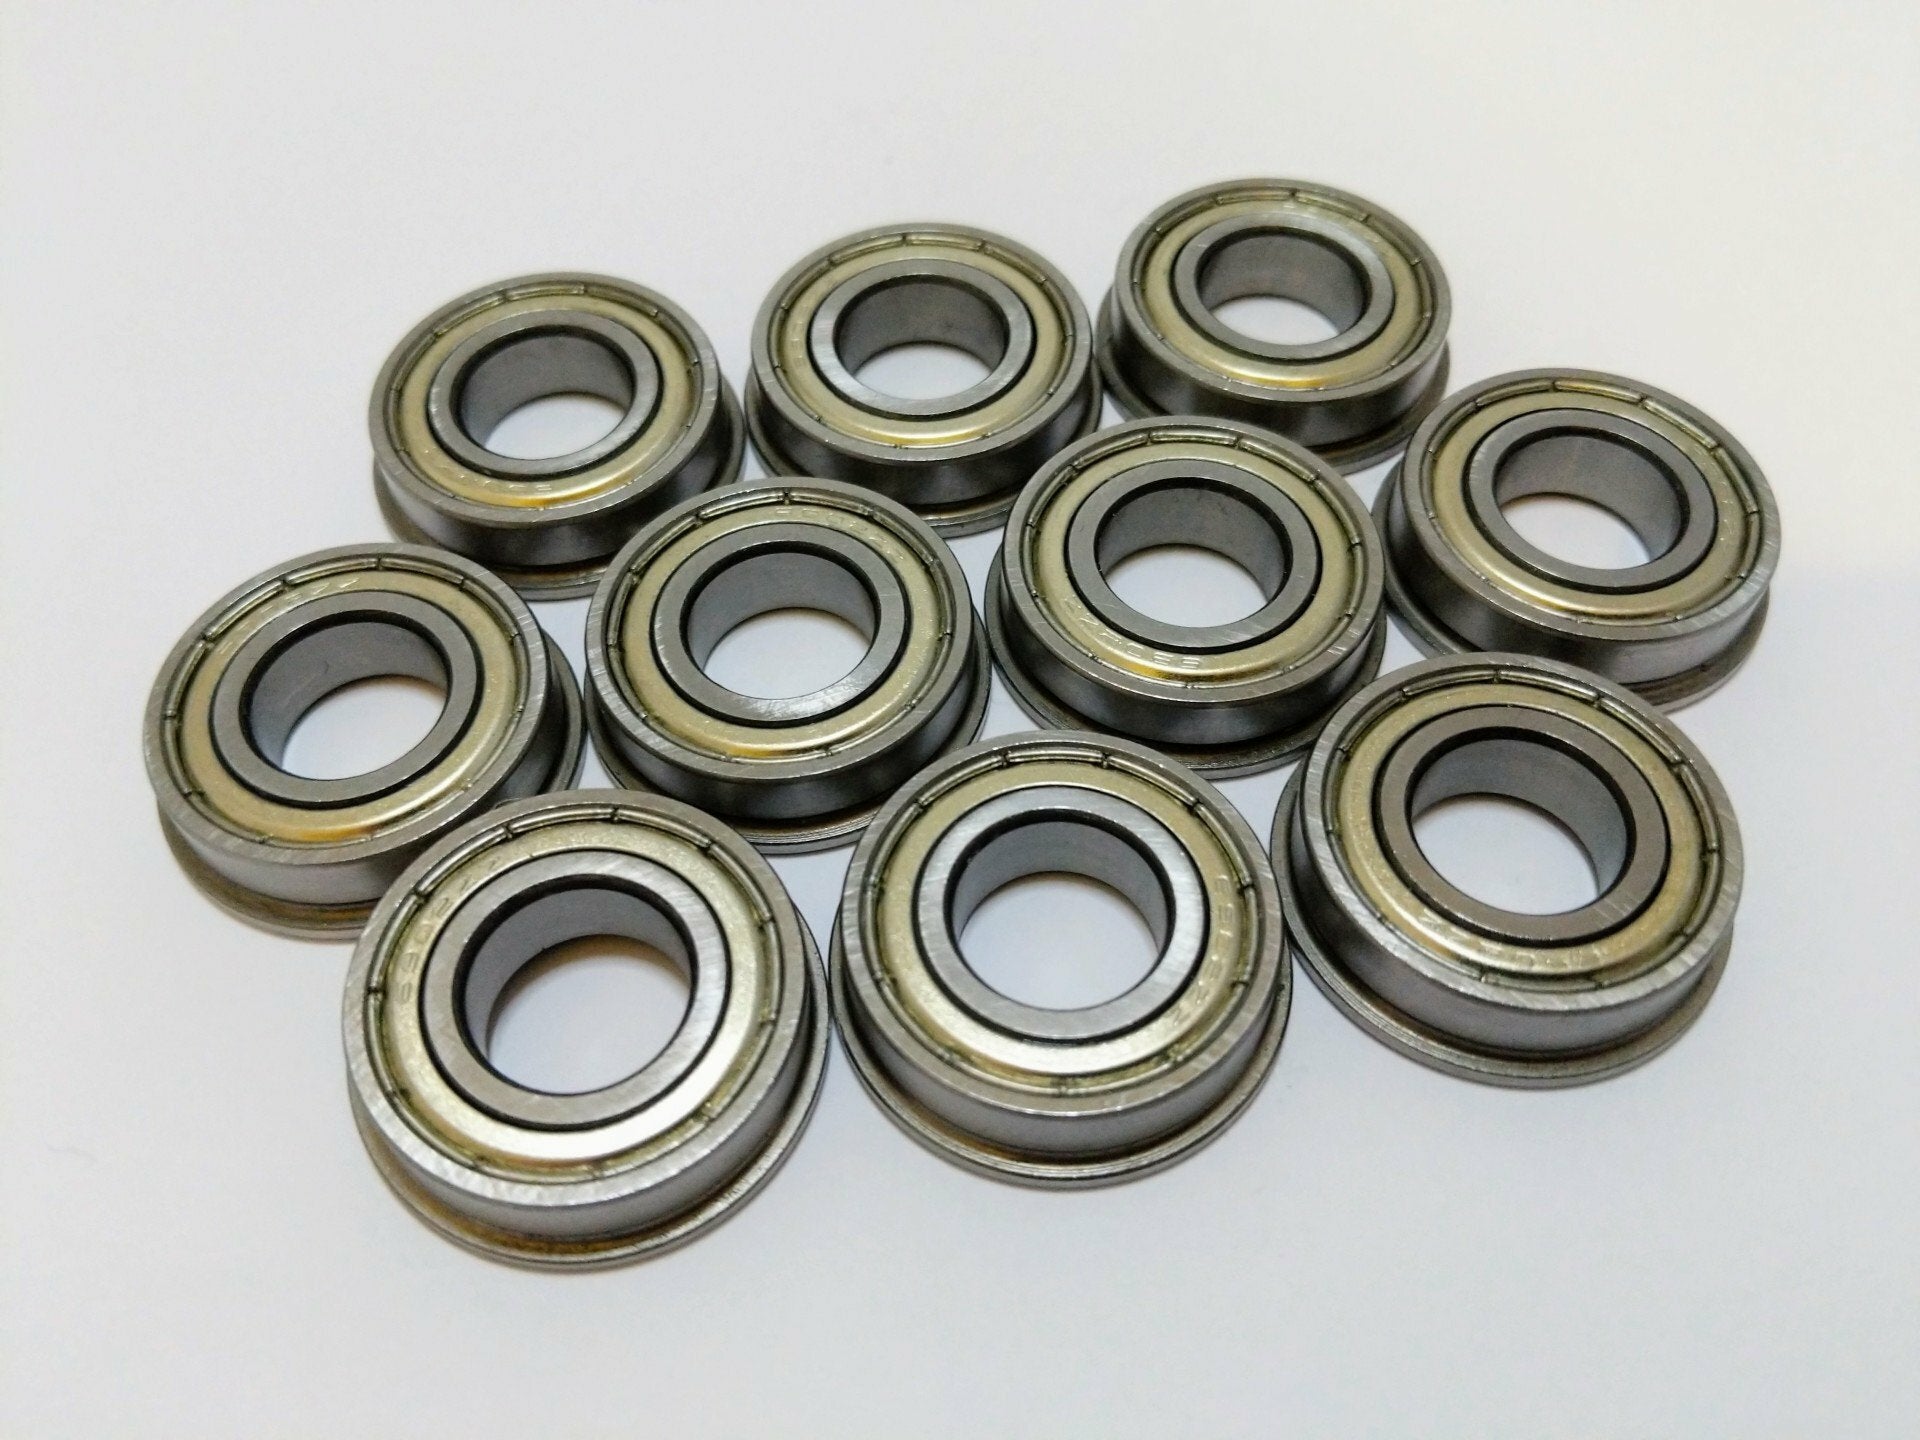 QTY 10 - Rounded 1/2" Hex Flanged 13.75mm Round Ball Bearings